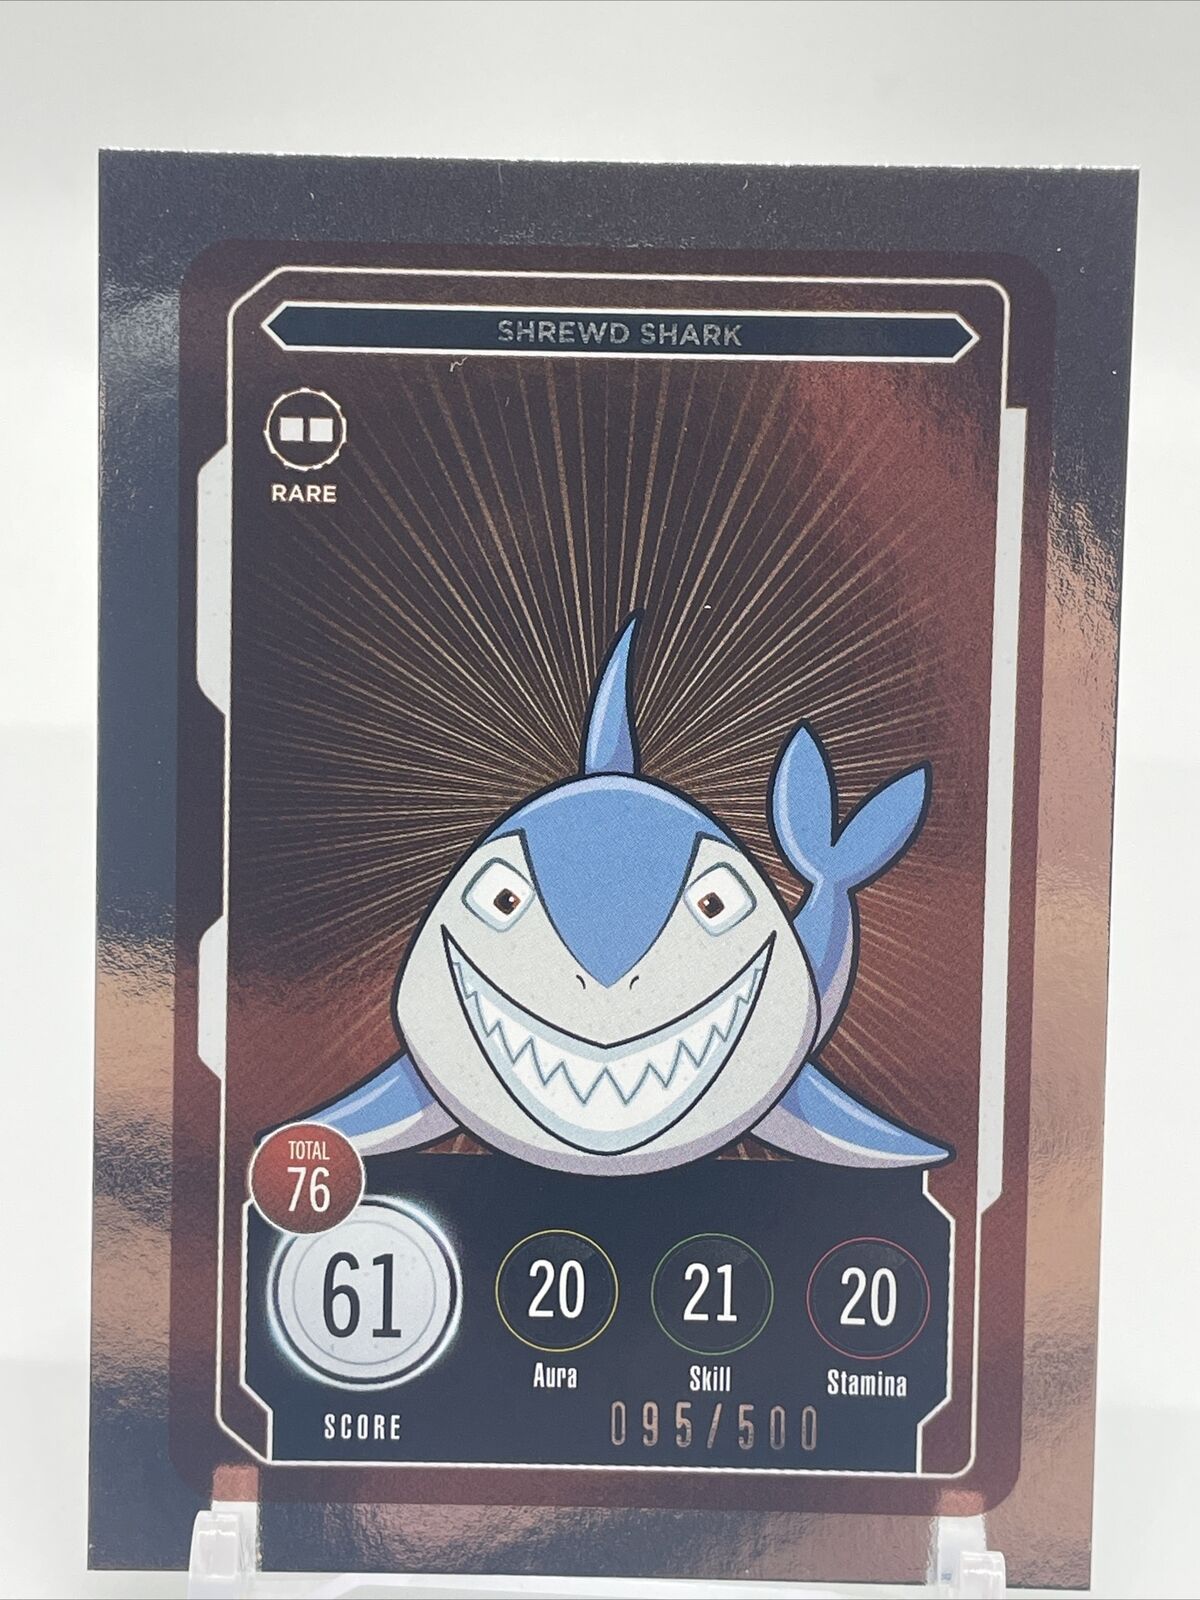 *RARE* Shrewd Shark /500 - Veefriends Series 2 Compete and Collect Gary Vee